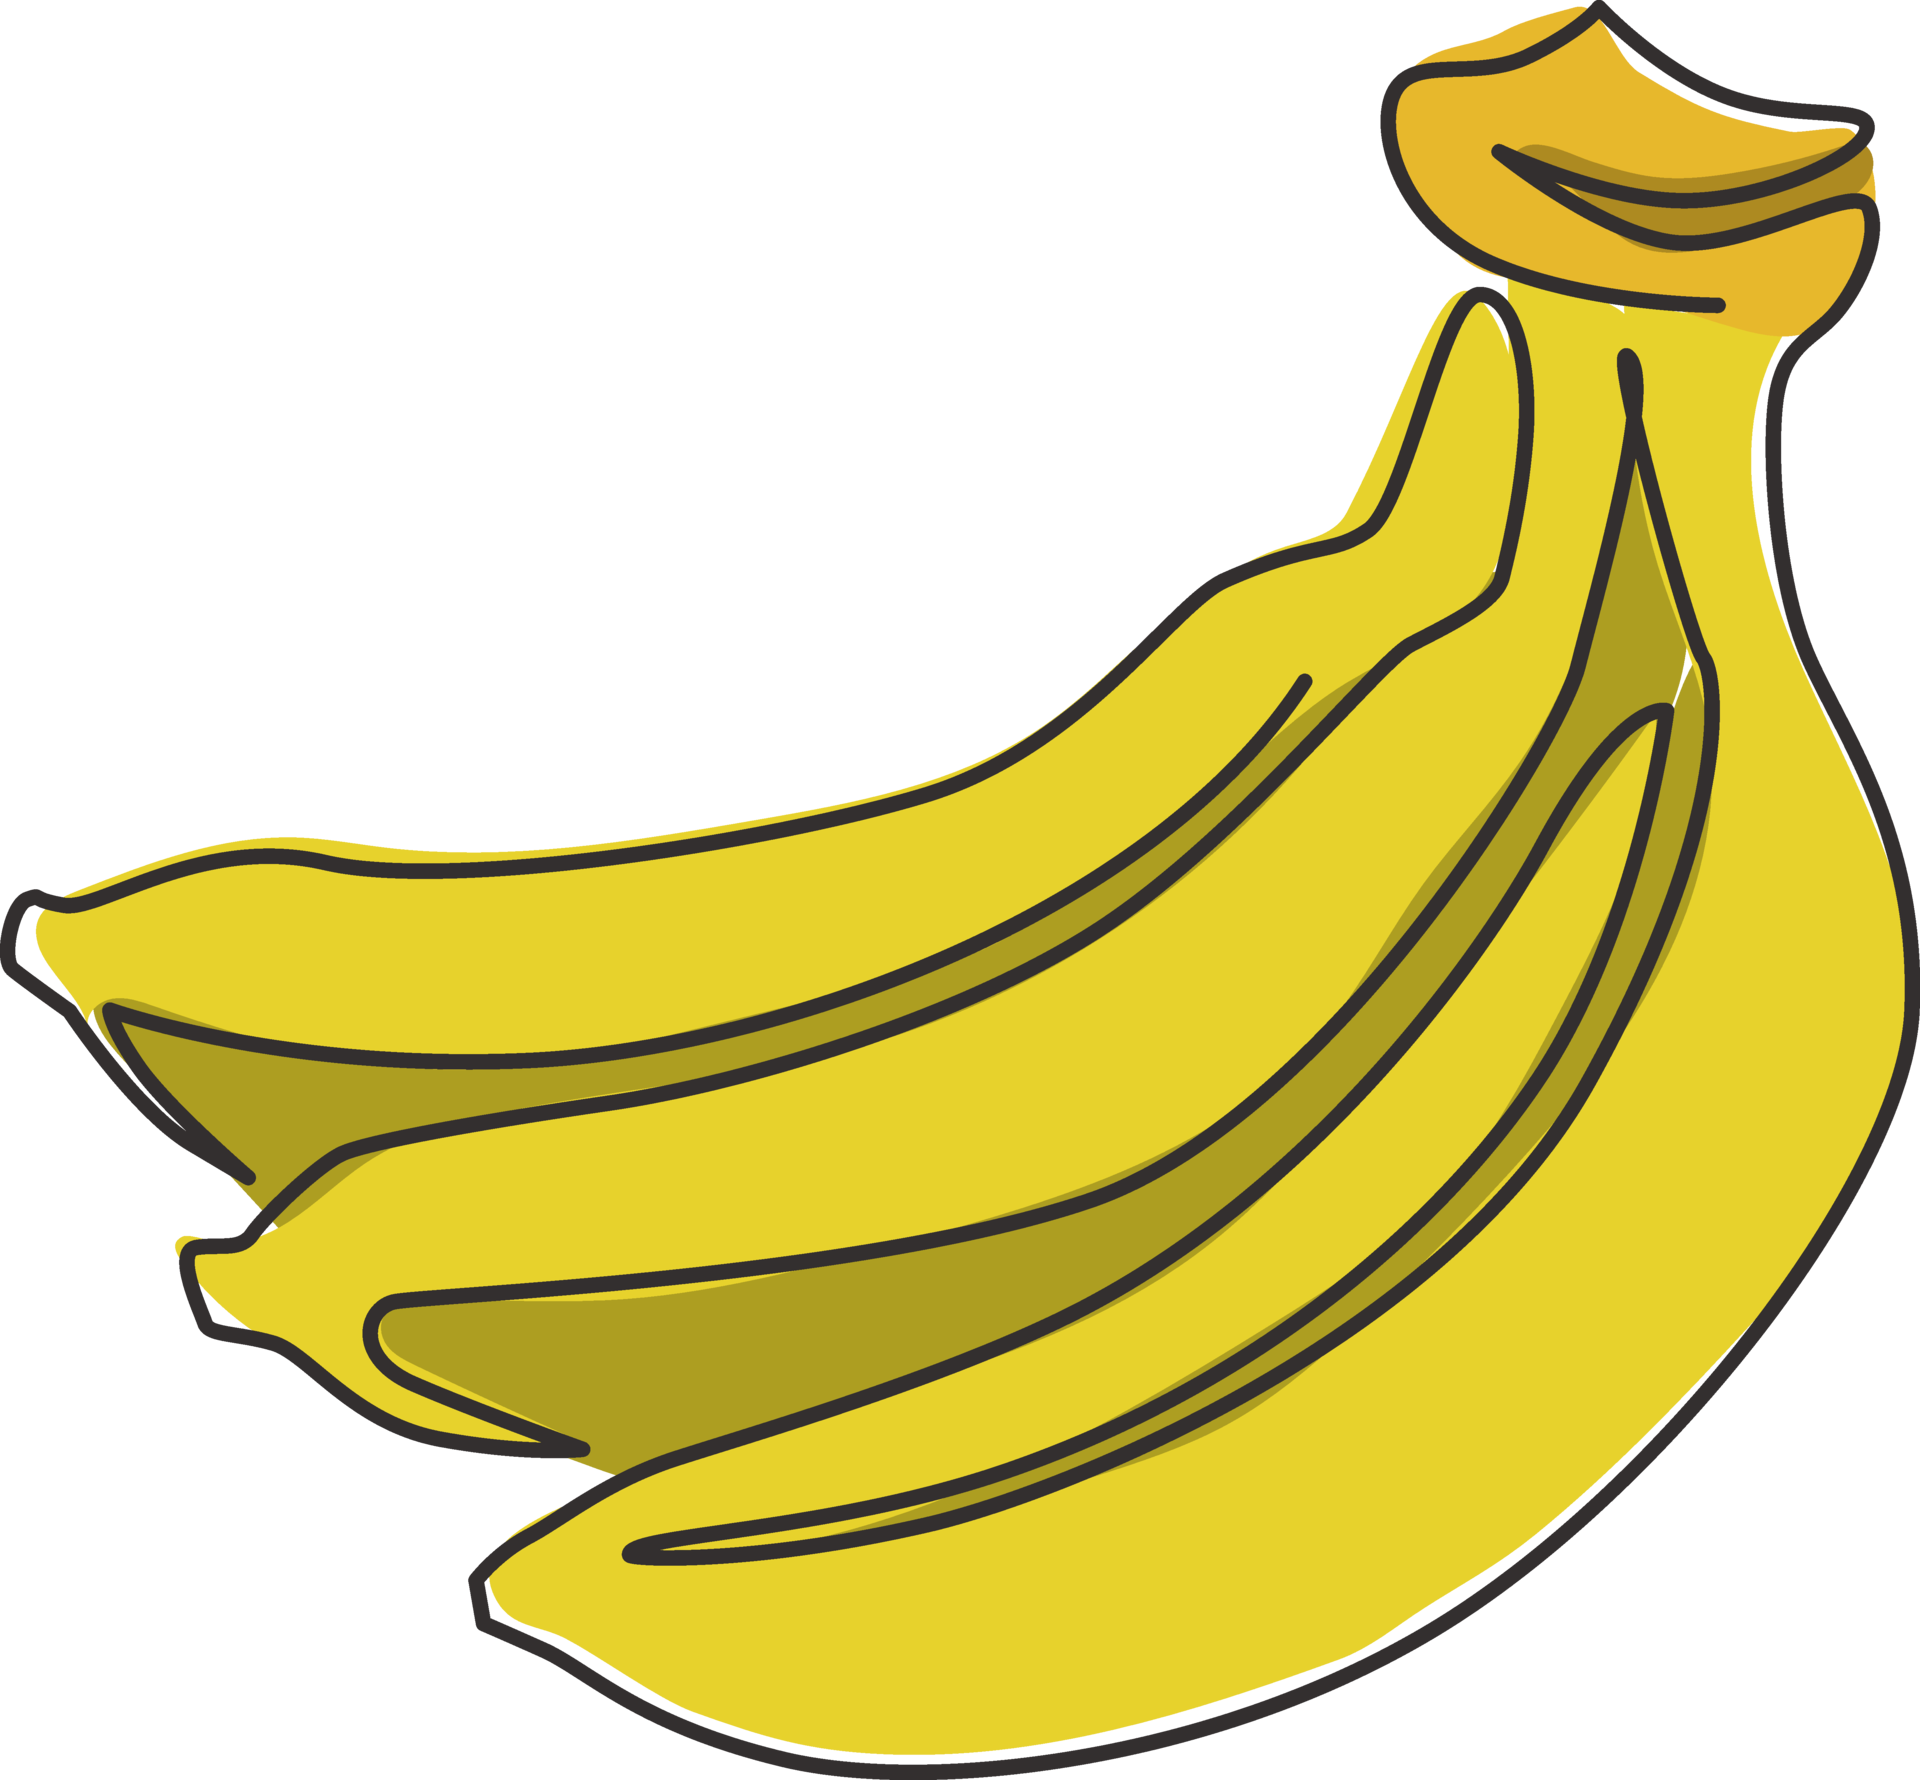 https://static.vecteezy.com/system/resources/previews/022/613/484/original/single-continuous-line-drawing-whole-bunch-healthy-organic-bananas-for-orchard-logo-fresh-summer-tropical-fruitage-concept-fruit-garden-icon-modern-one-line-draw-design-graphic-vector-illustration-png.png